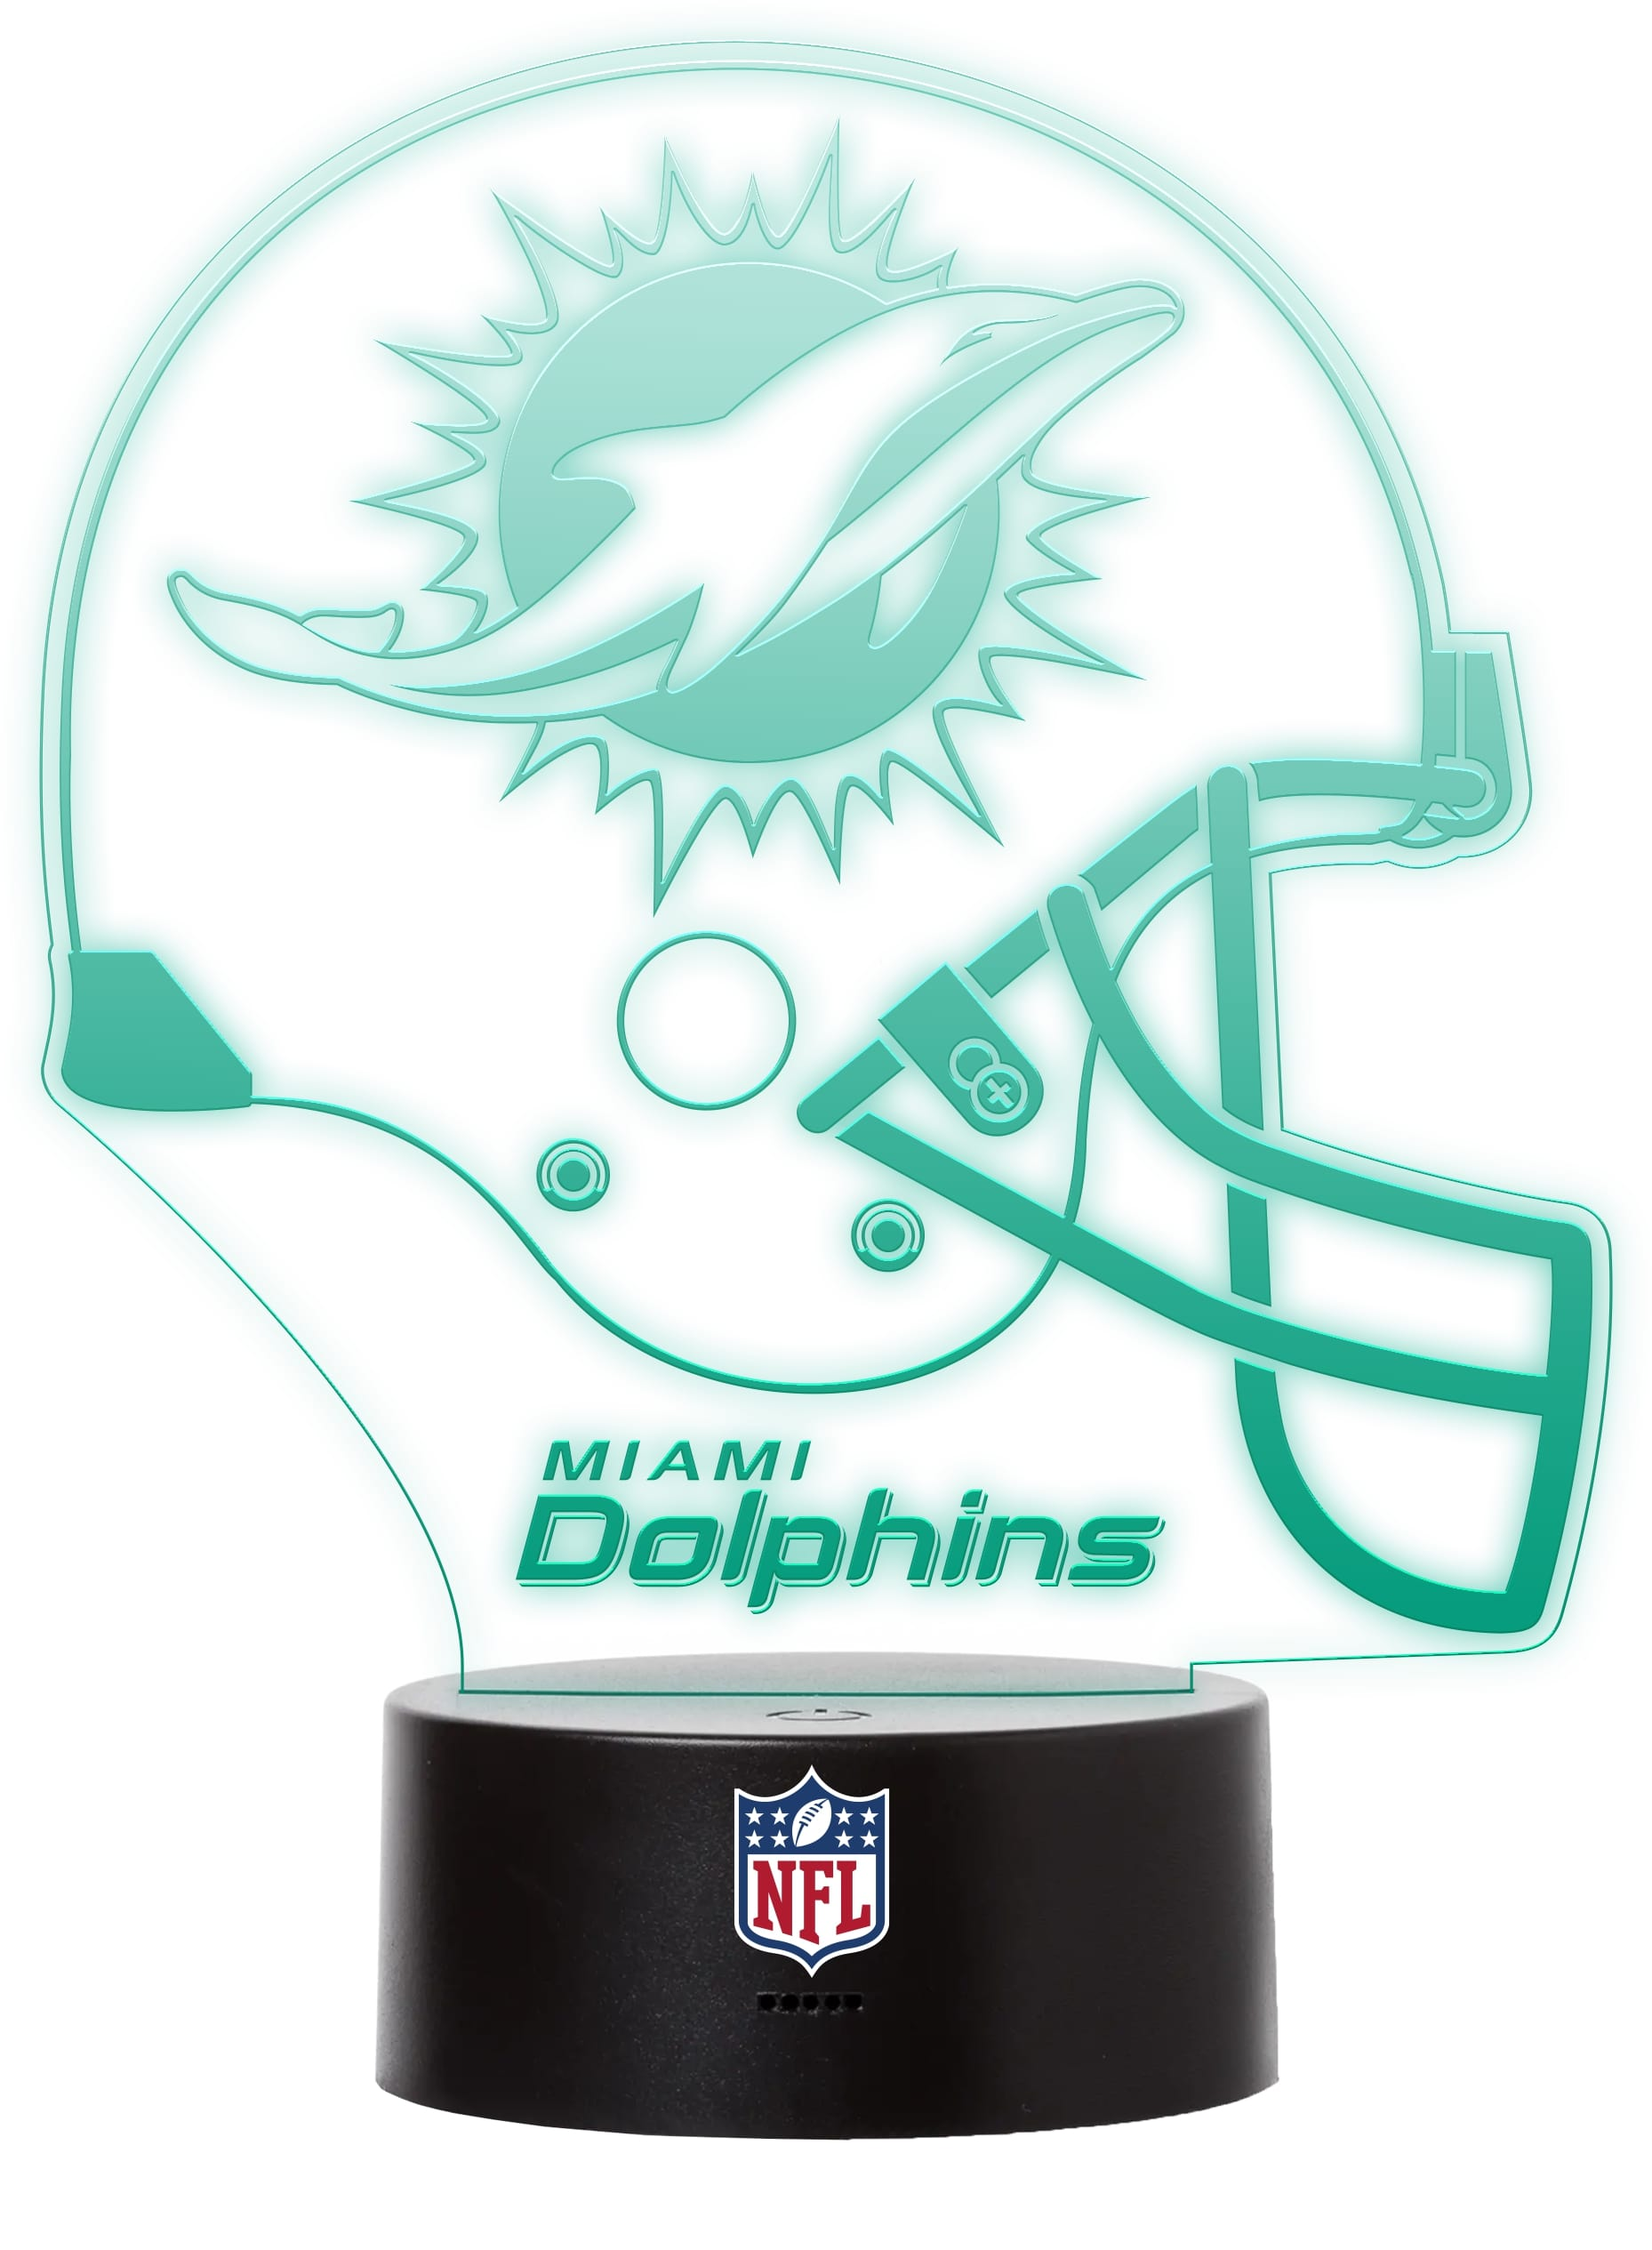 BRANDING LED-Licht GREAT NFL Miami Dolphins Football \